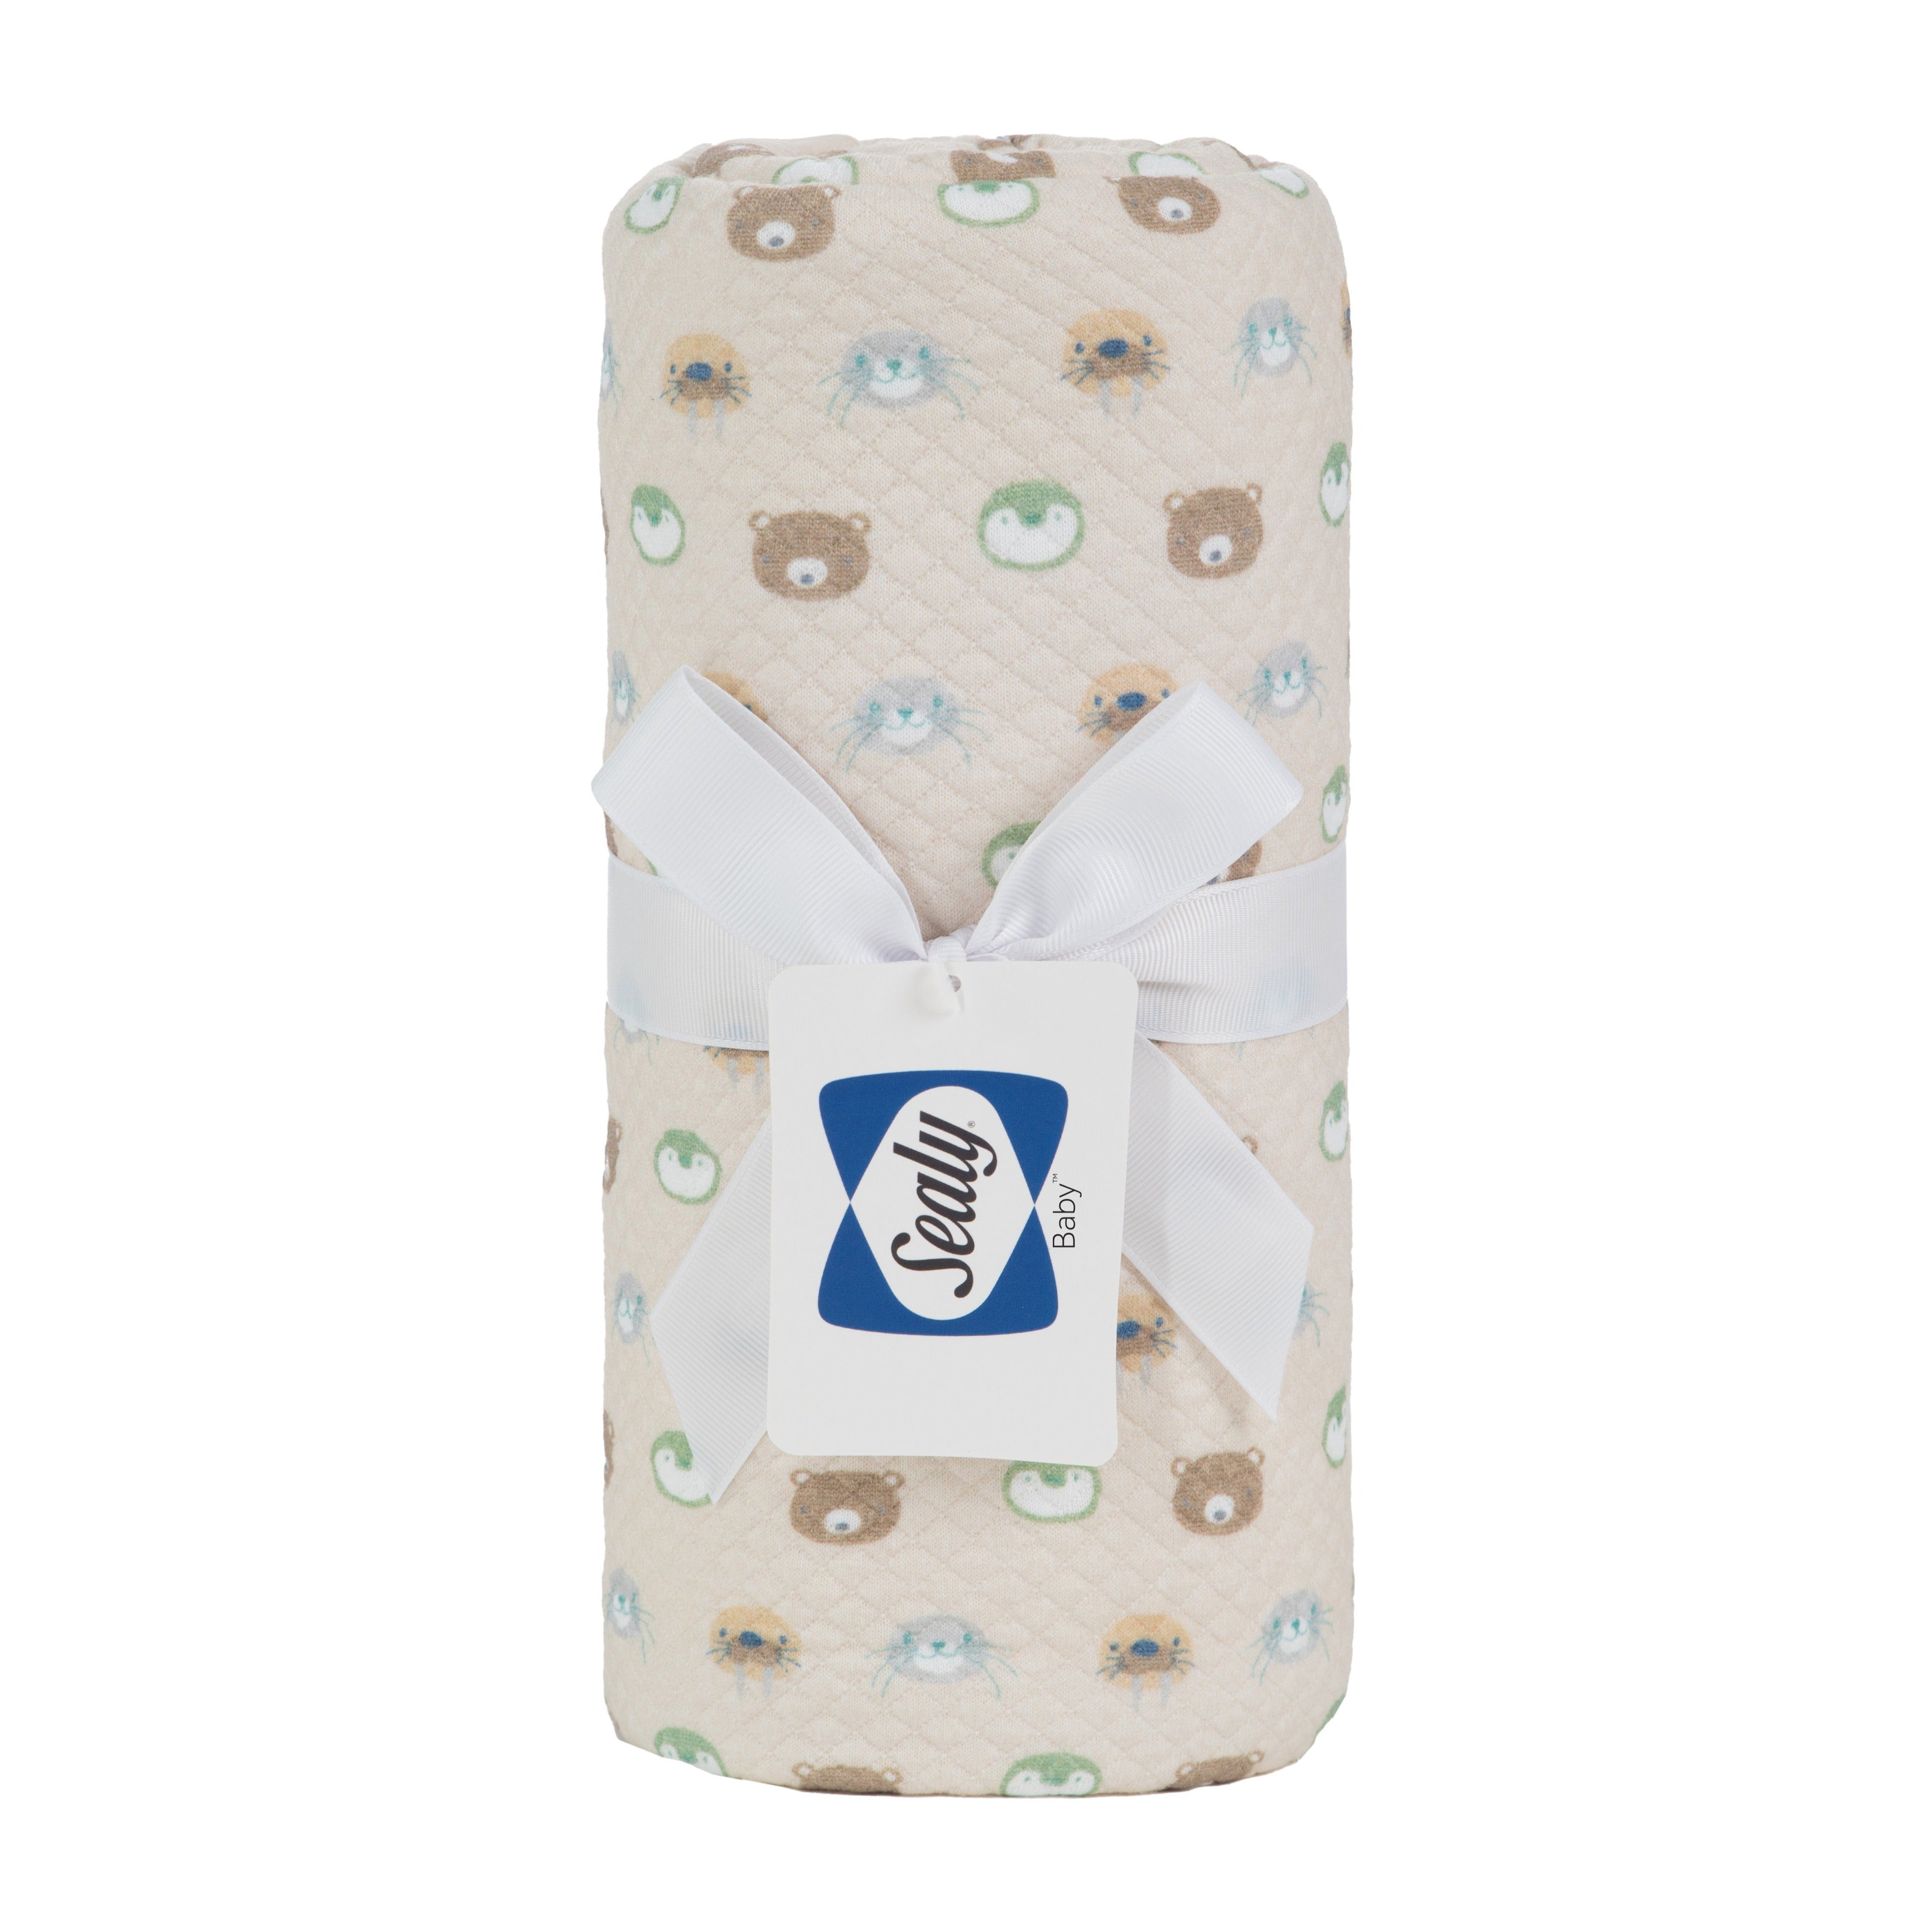 Sealy Baby Printed Knit Blanket - Beige Animal Faces